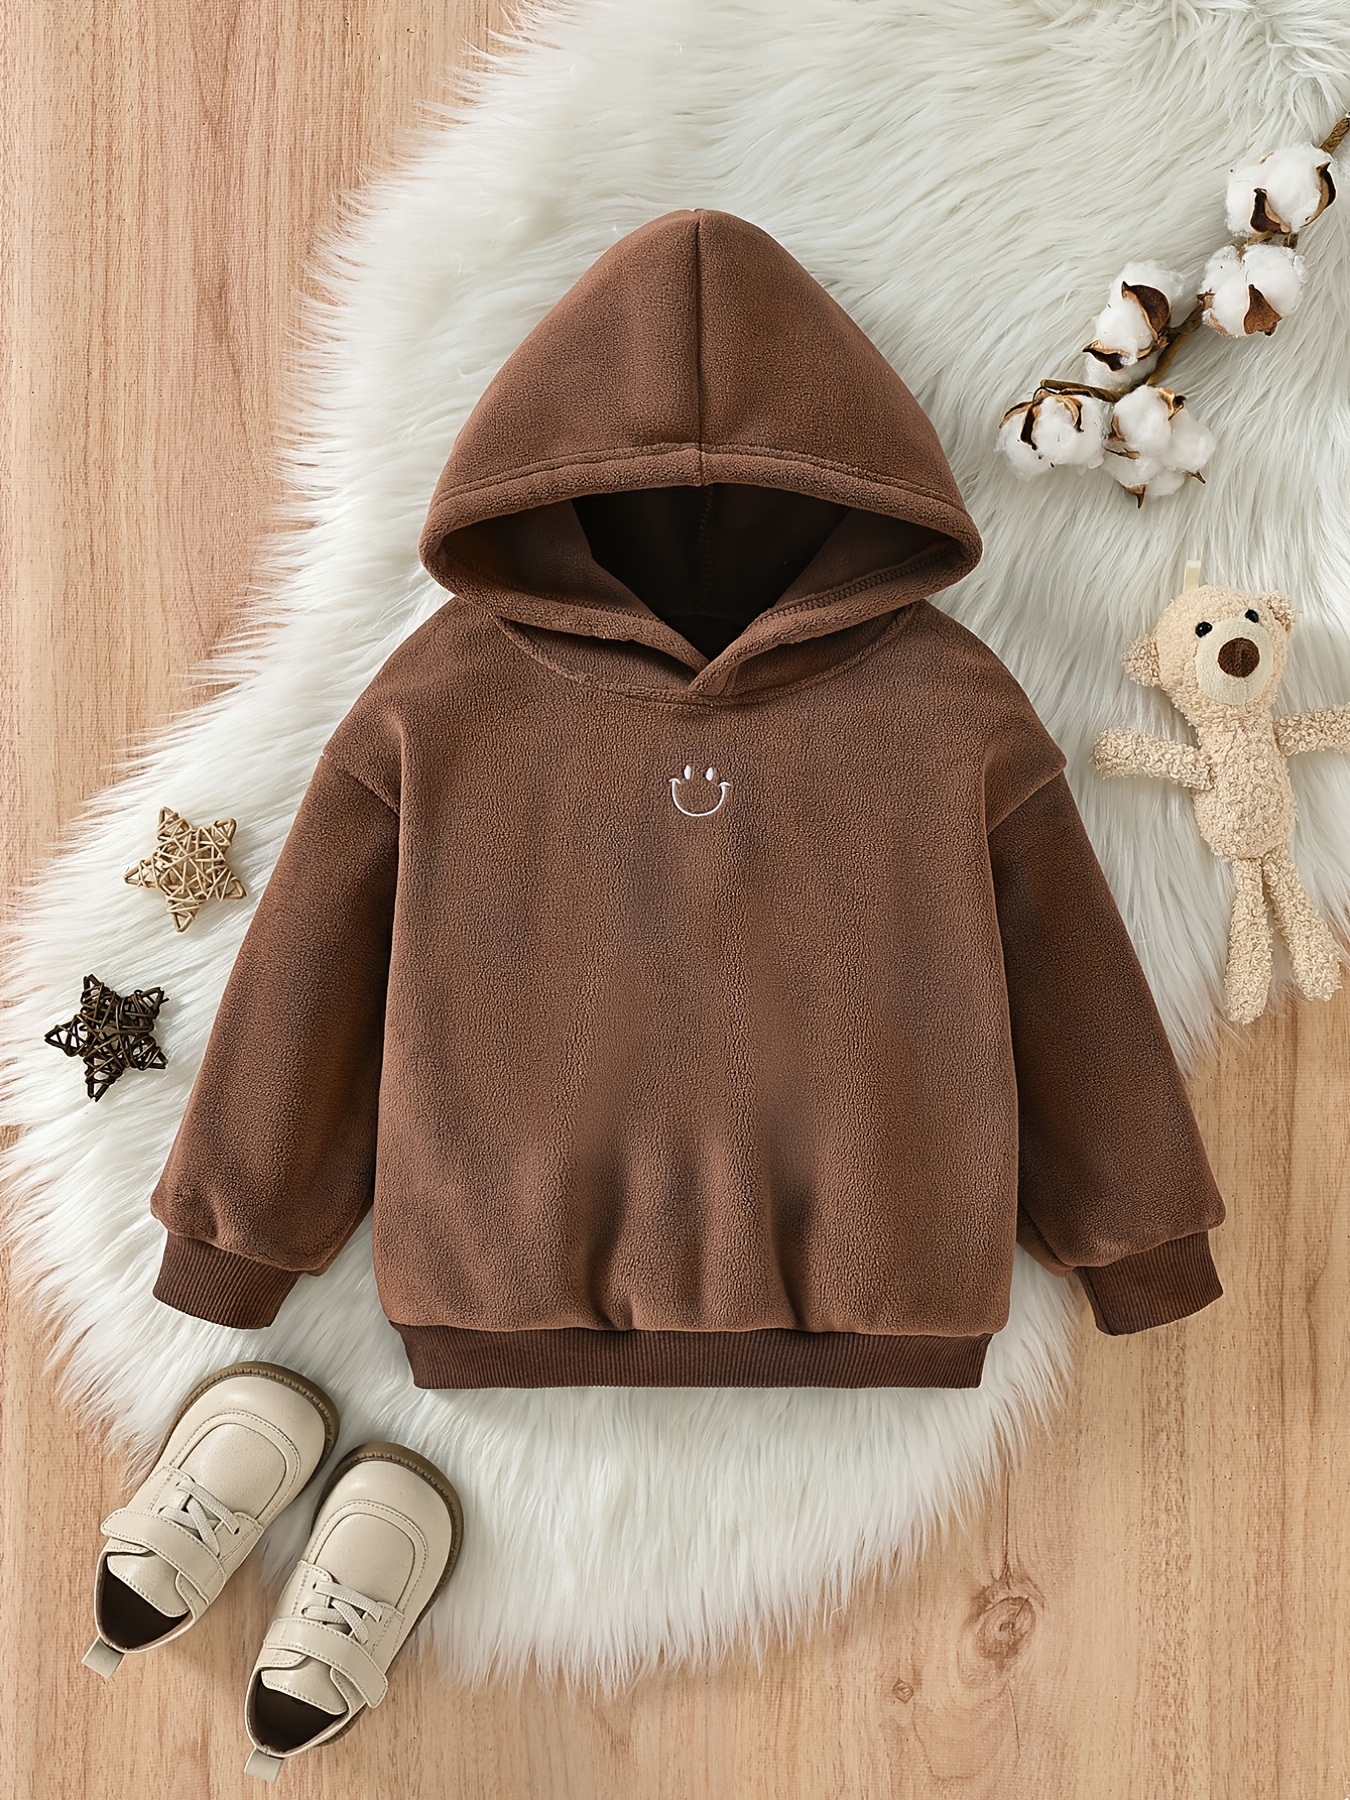 Toddler Boys & Girls Thick Hooded Sweatshirt Smile Face Embroidery Hoodies  For Autumn And Winter, Everyday